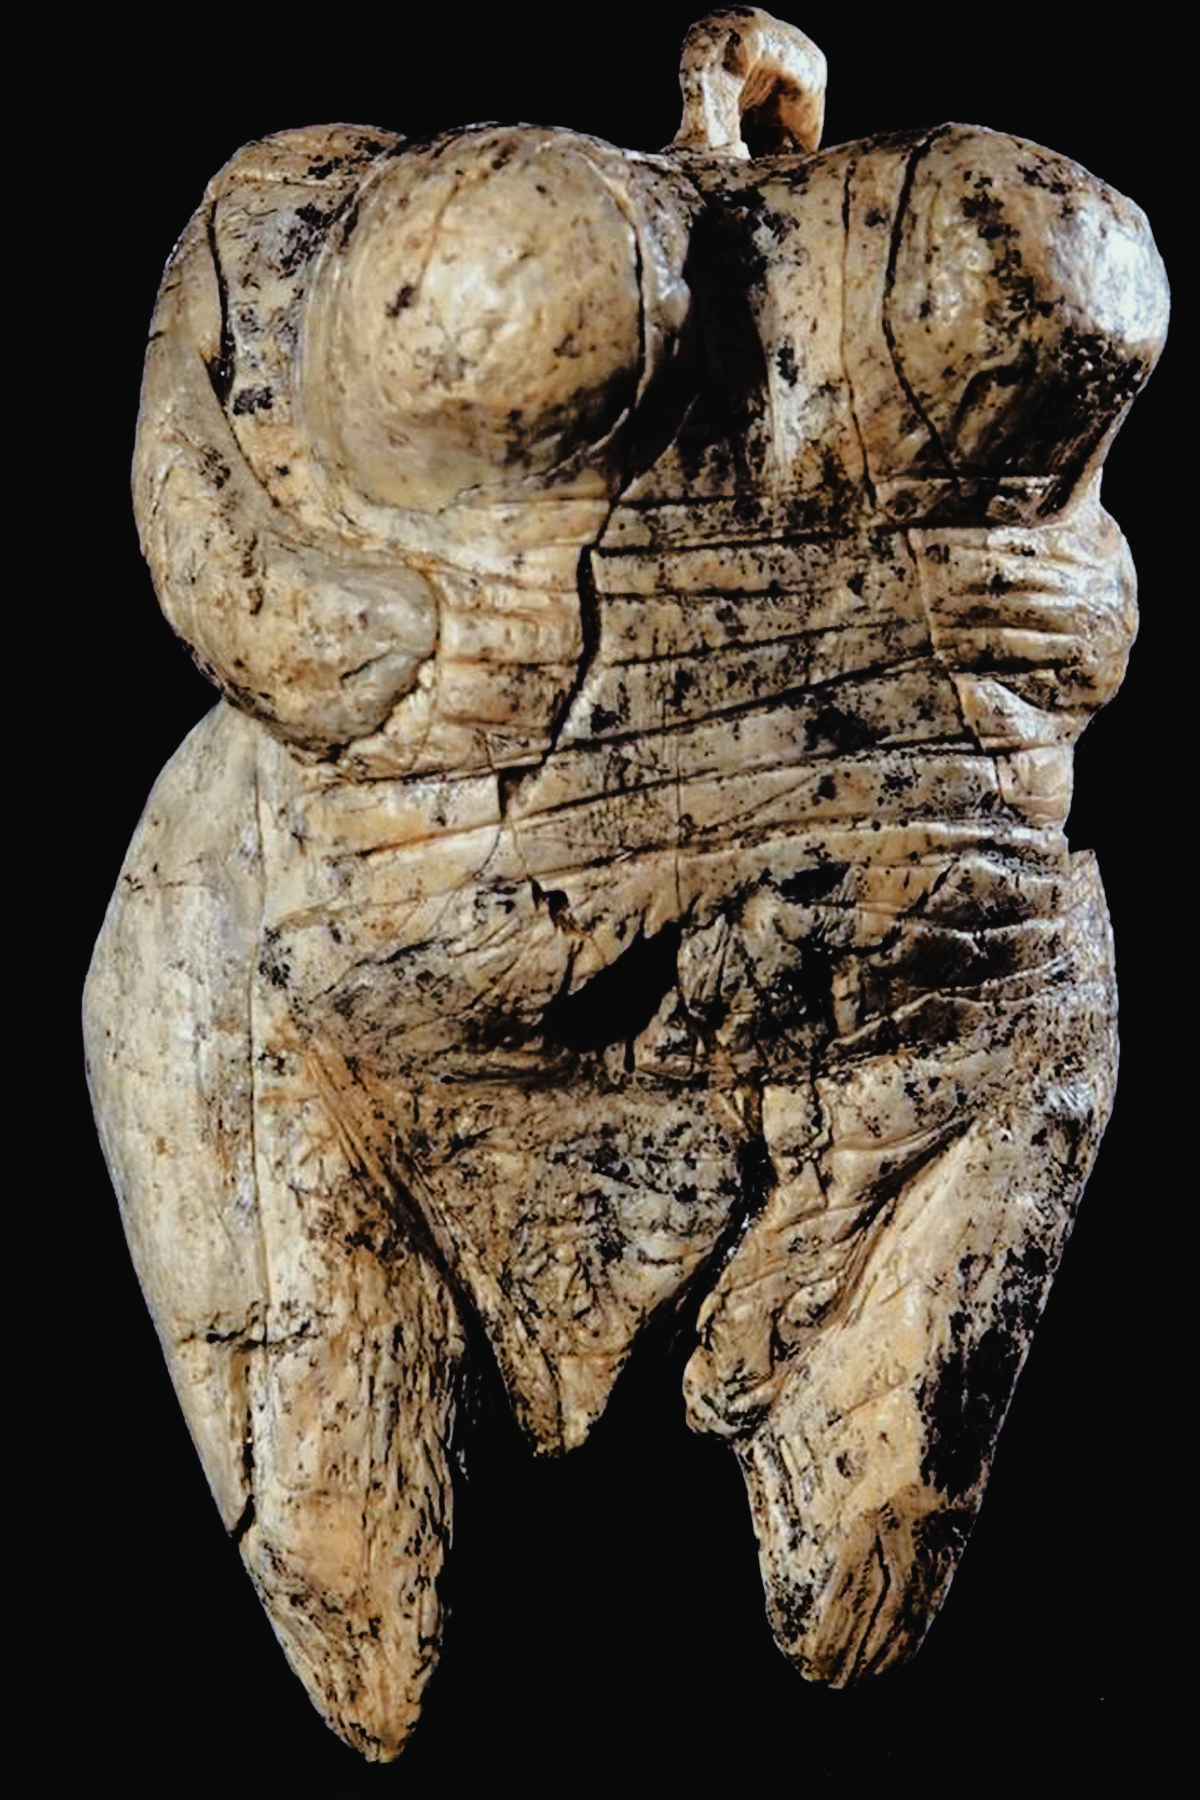 Venus of Hohle Fels Sculptures of the Ice Age